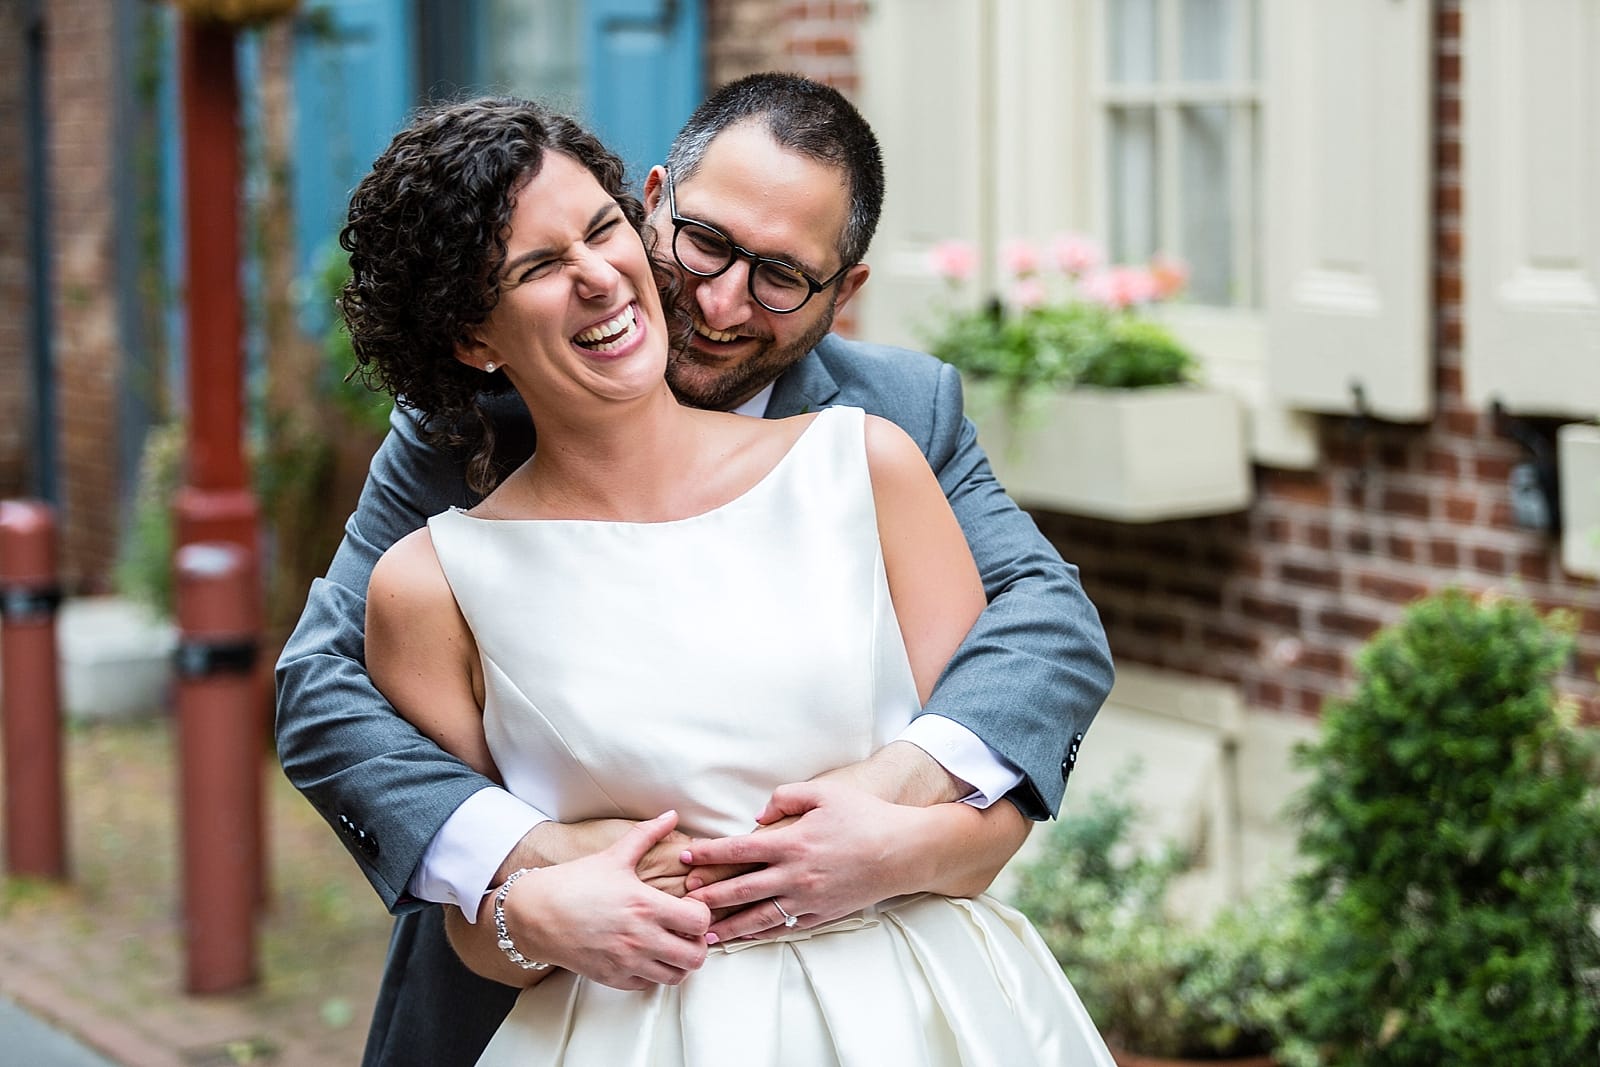 Groom embraces a laughing bride from behind in Philadelphia's Elfreth's Alley